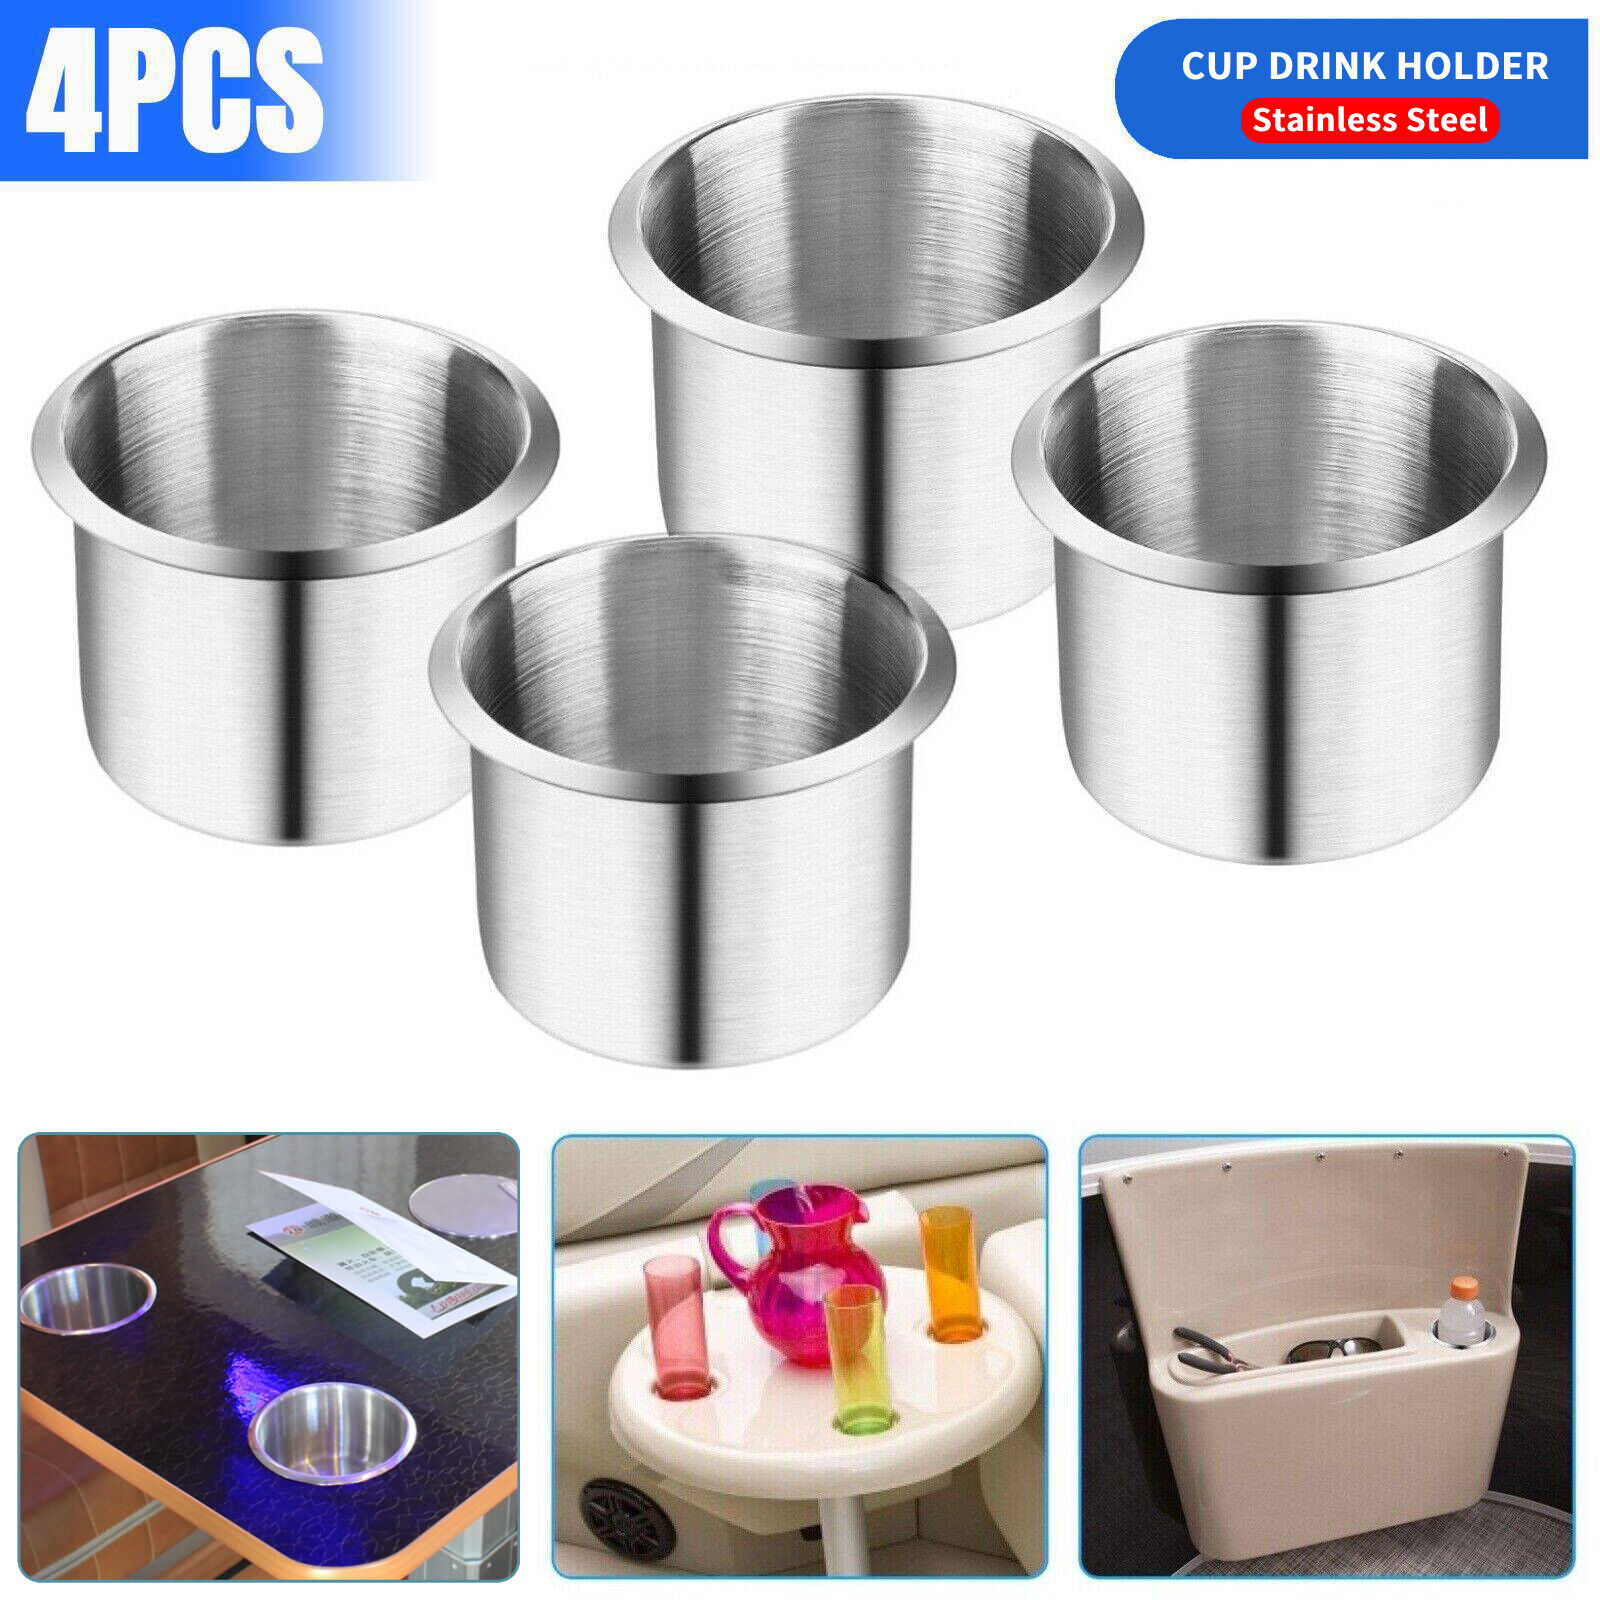 4PCS Stainless Steel Cup Drink Holders Mount for Car Truck Marine Boat Camper RV